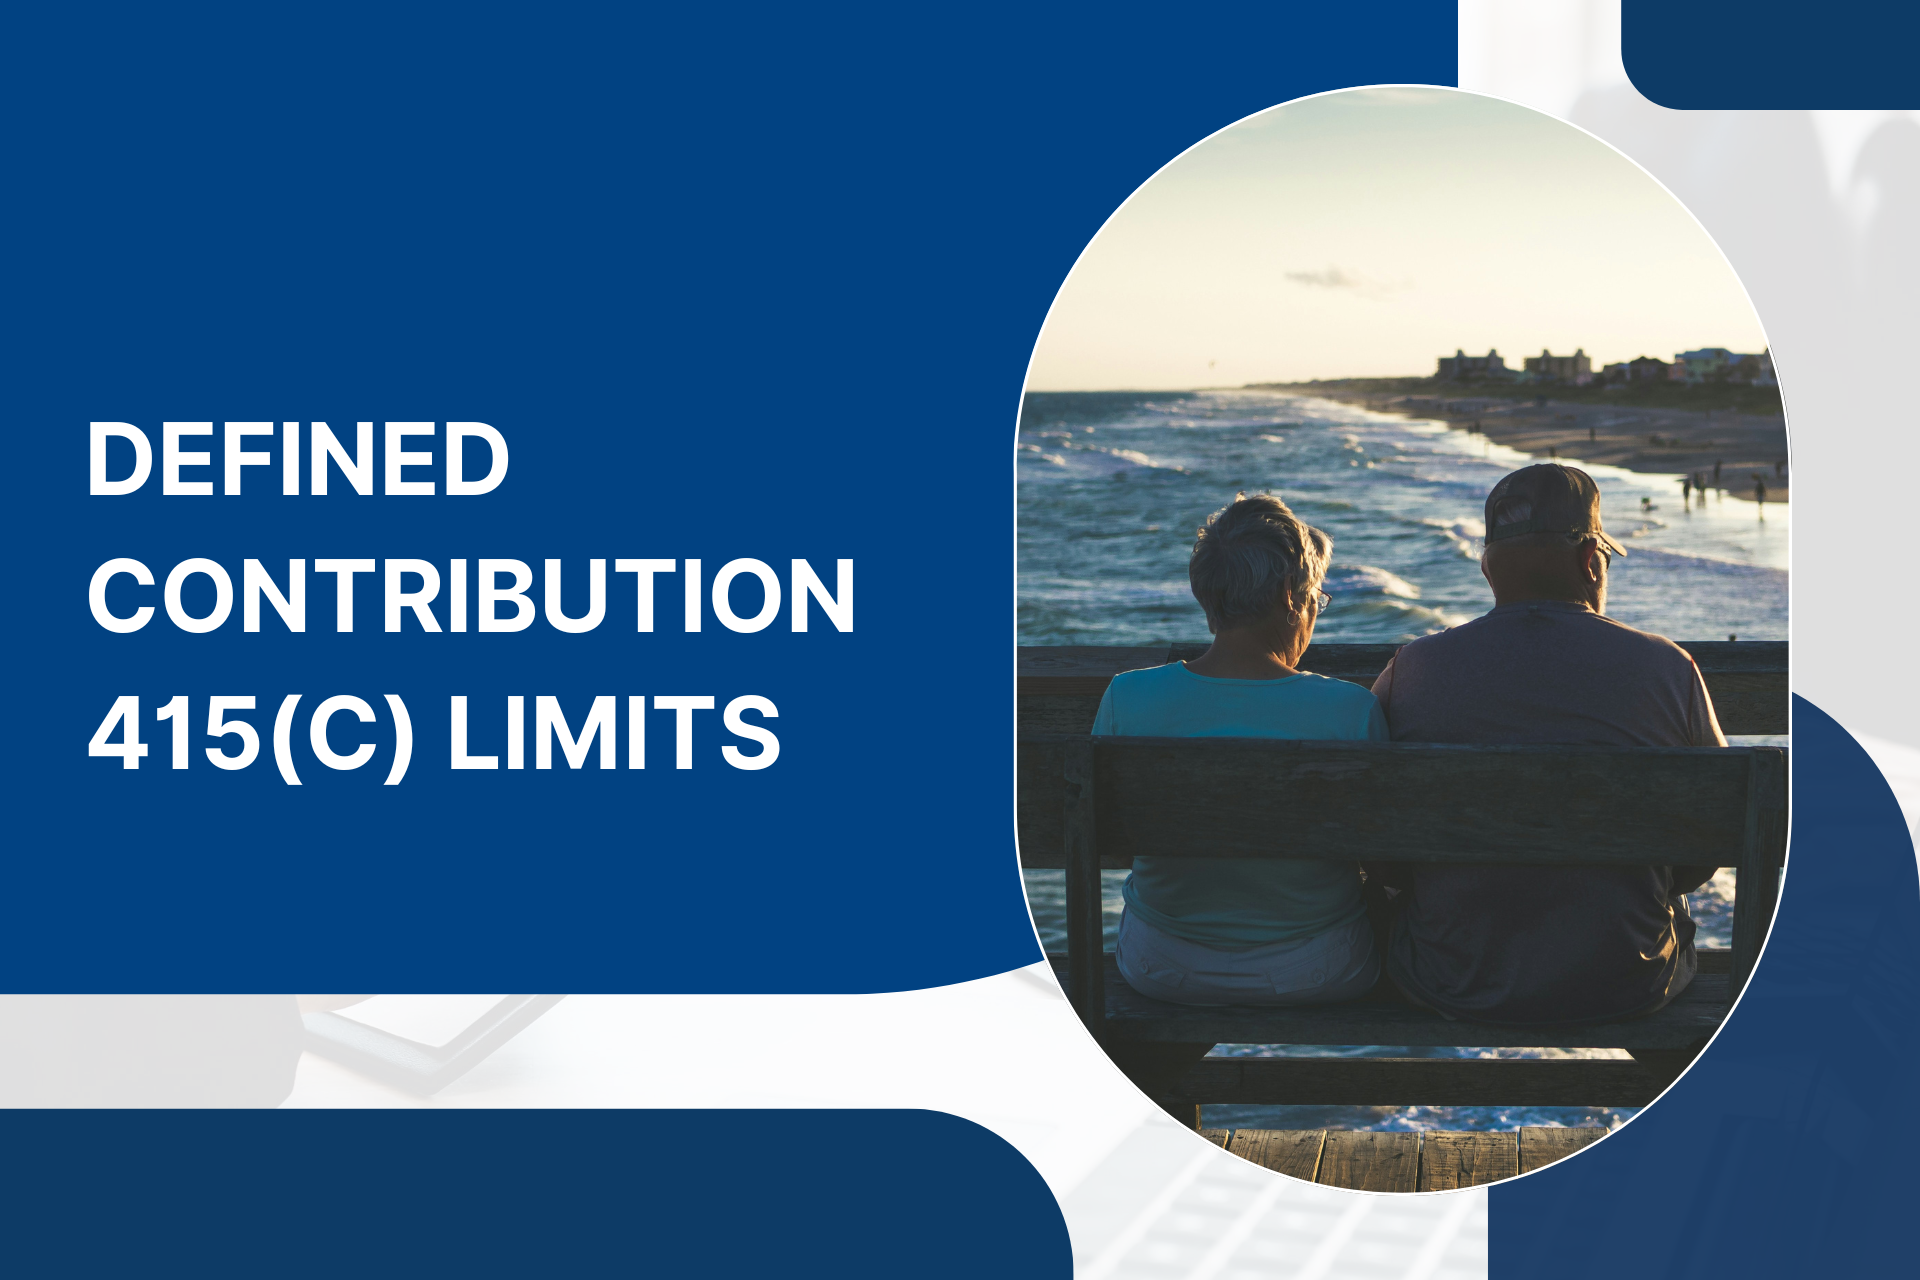 Defined Contribution 415(c) Limits